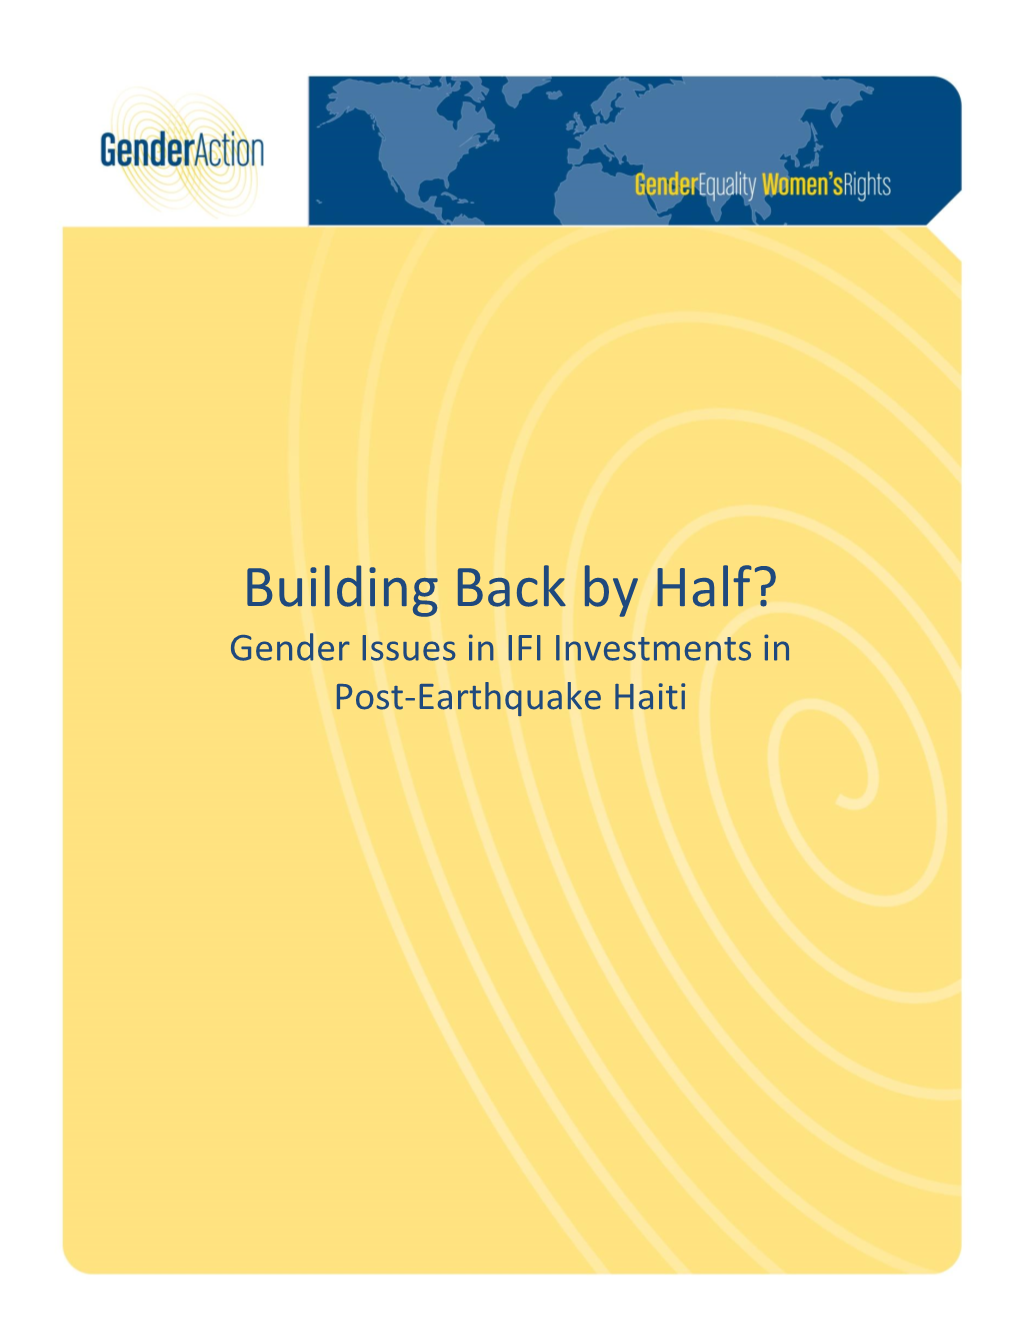 Building Back by Half? Gender Issues in IFI Investments in Post-Earthquake Haiti